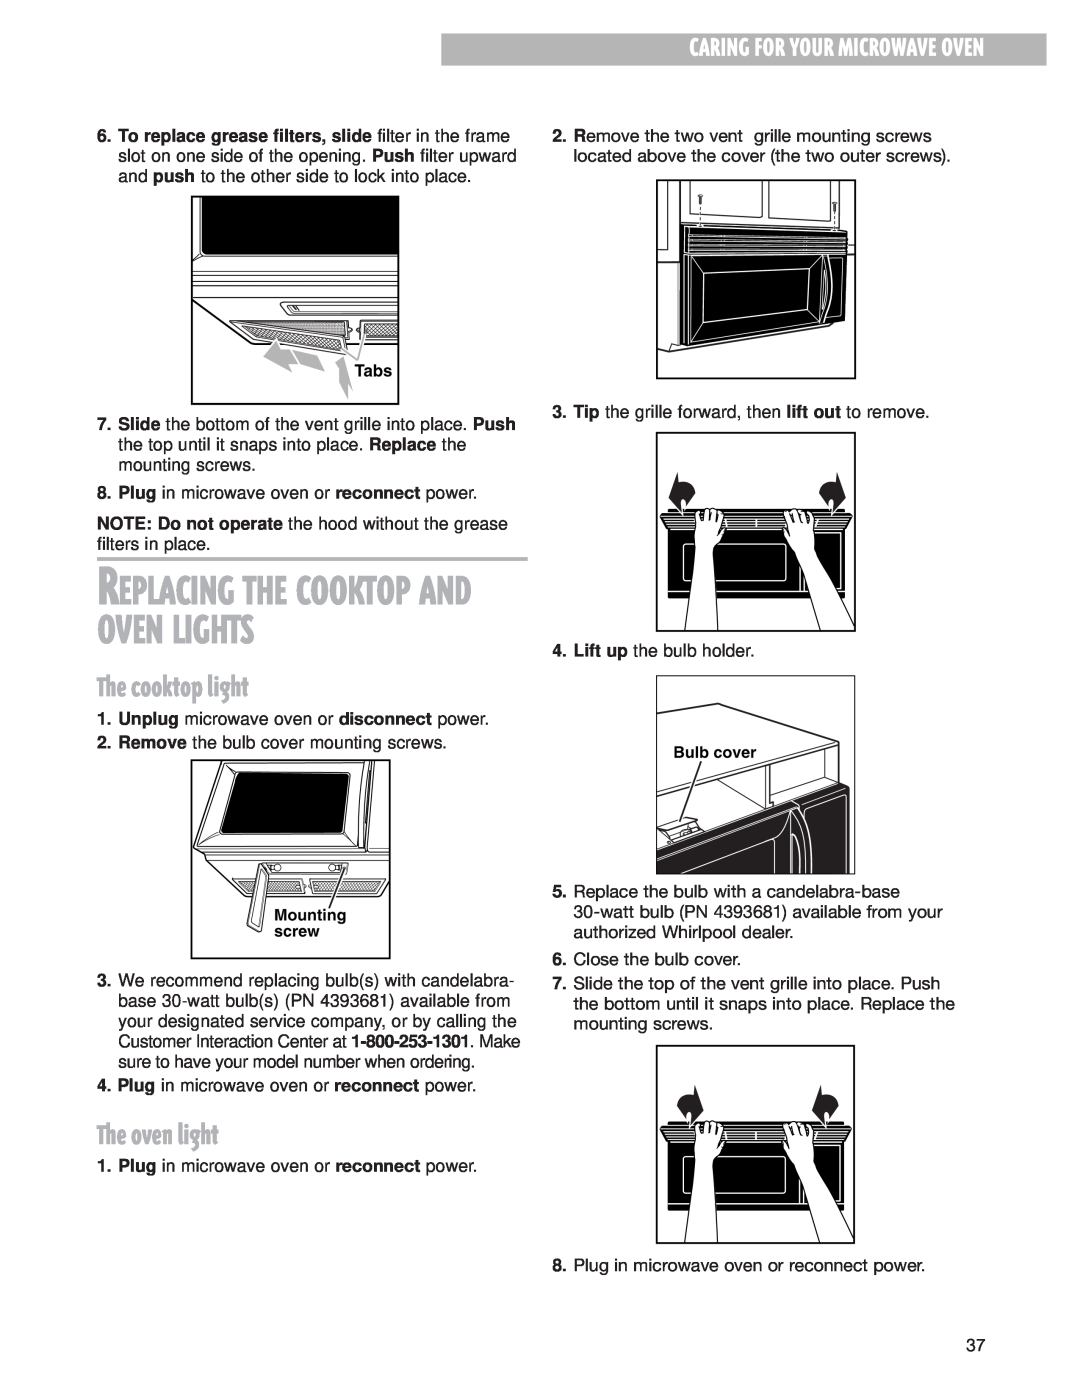 Whirlpool MH8150XJ installation instructions The cooktop light, The oven light, Replacing The Cooktop And Oven Lights 